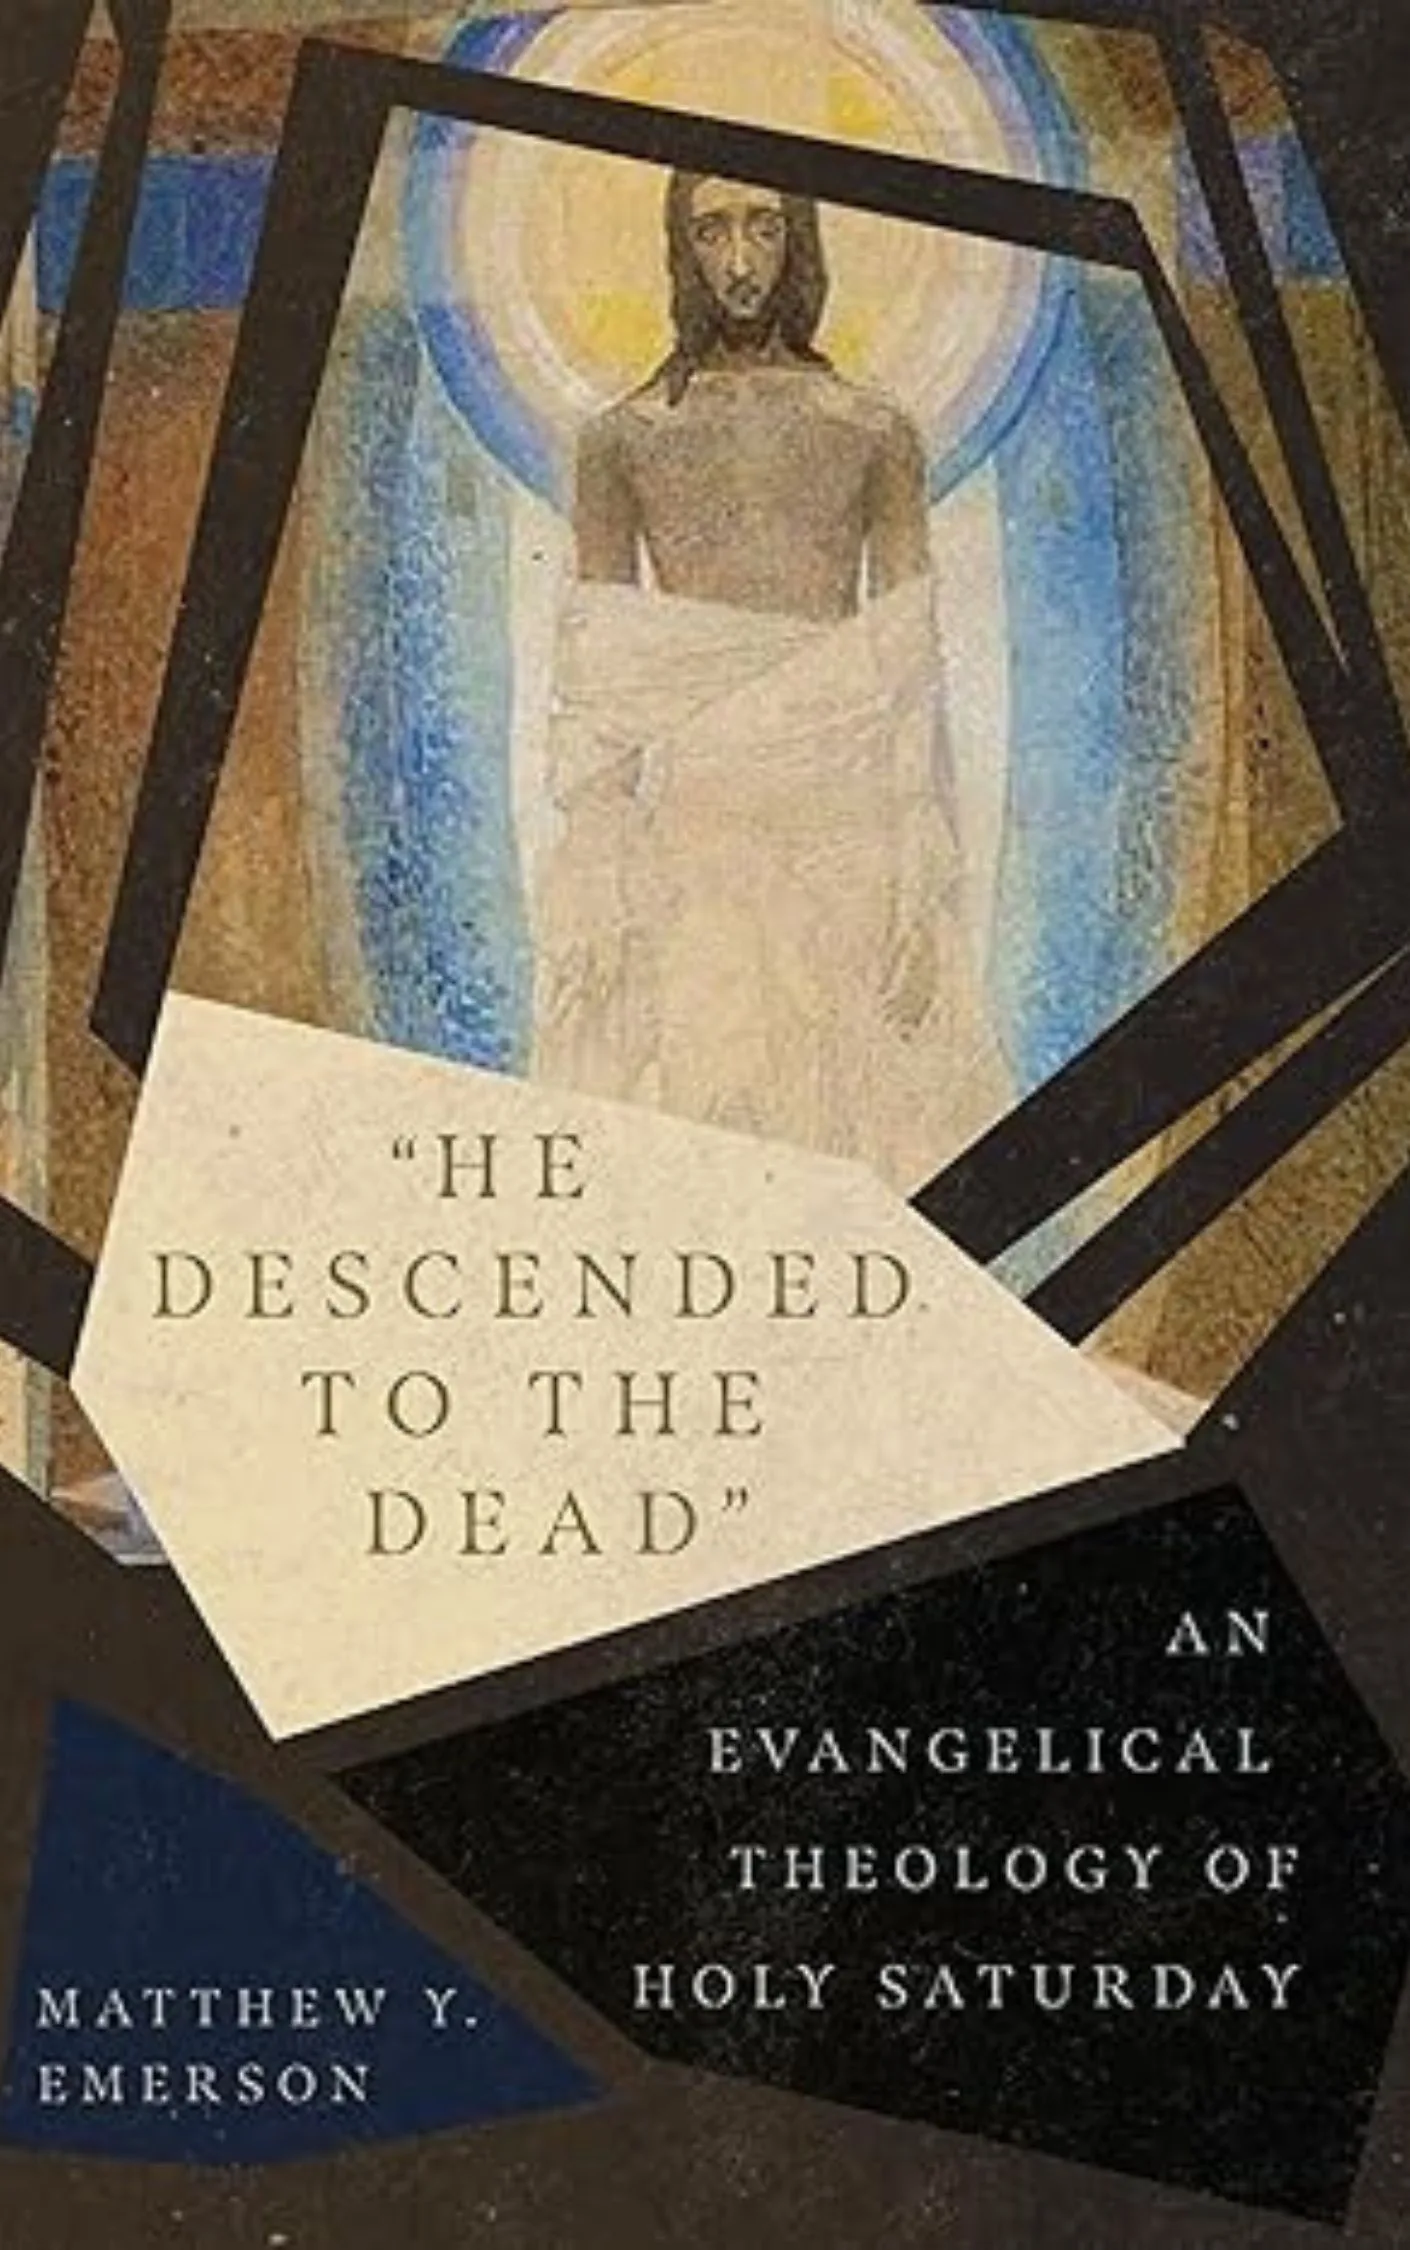 He Descended to the Dead: An Evangelical Theology of Holy Saturday by Matthew Y. Emerson